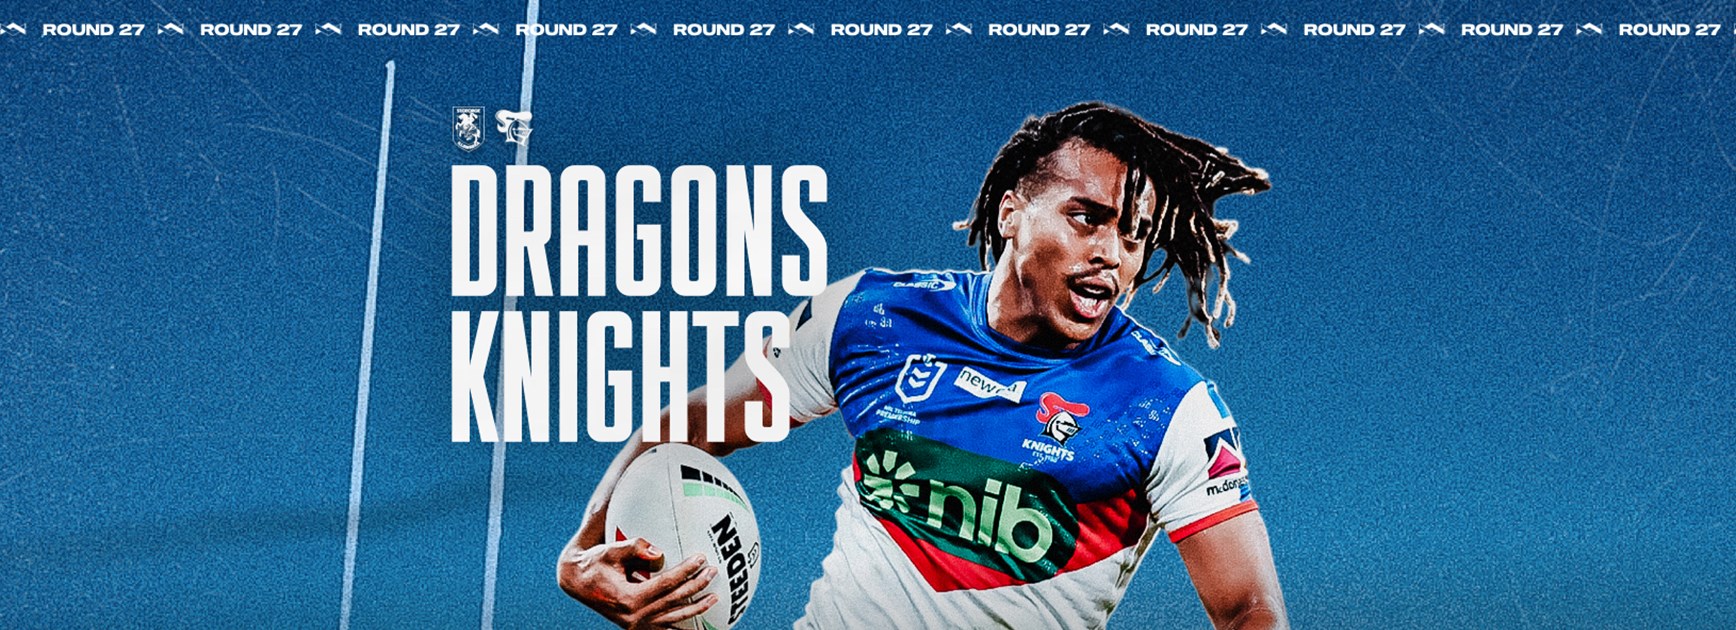 Defend the Kingdom: NRL Round 27 preview